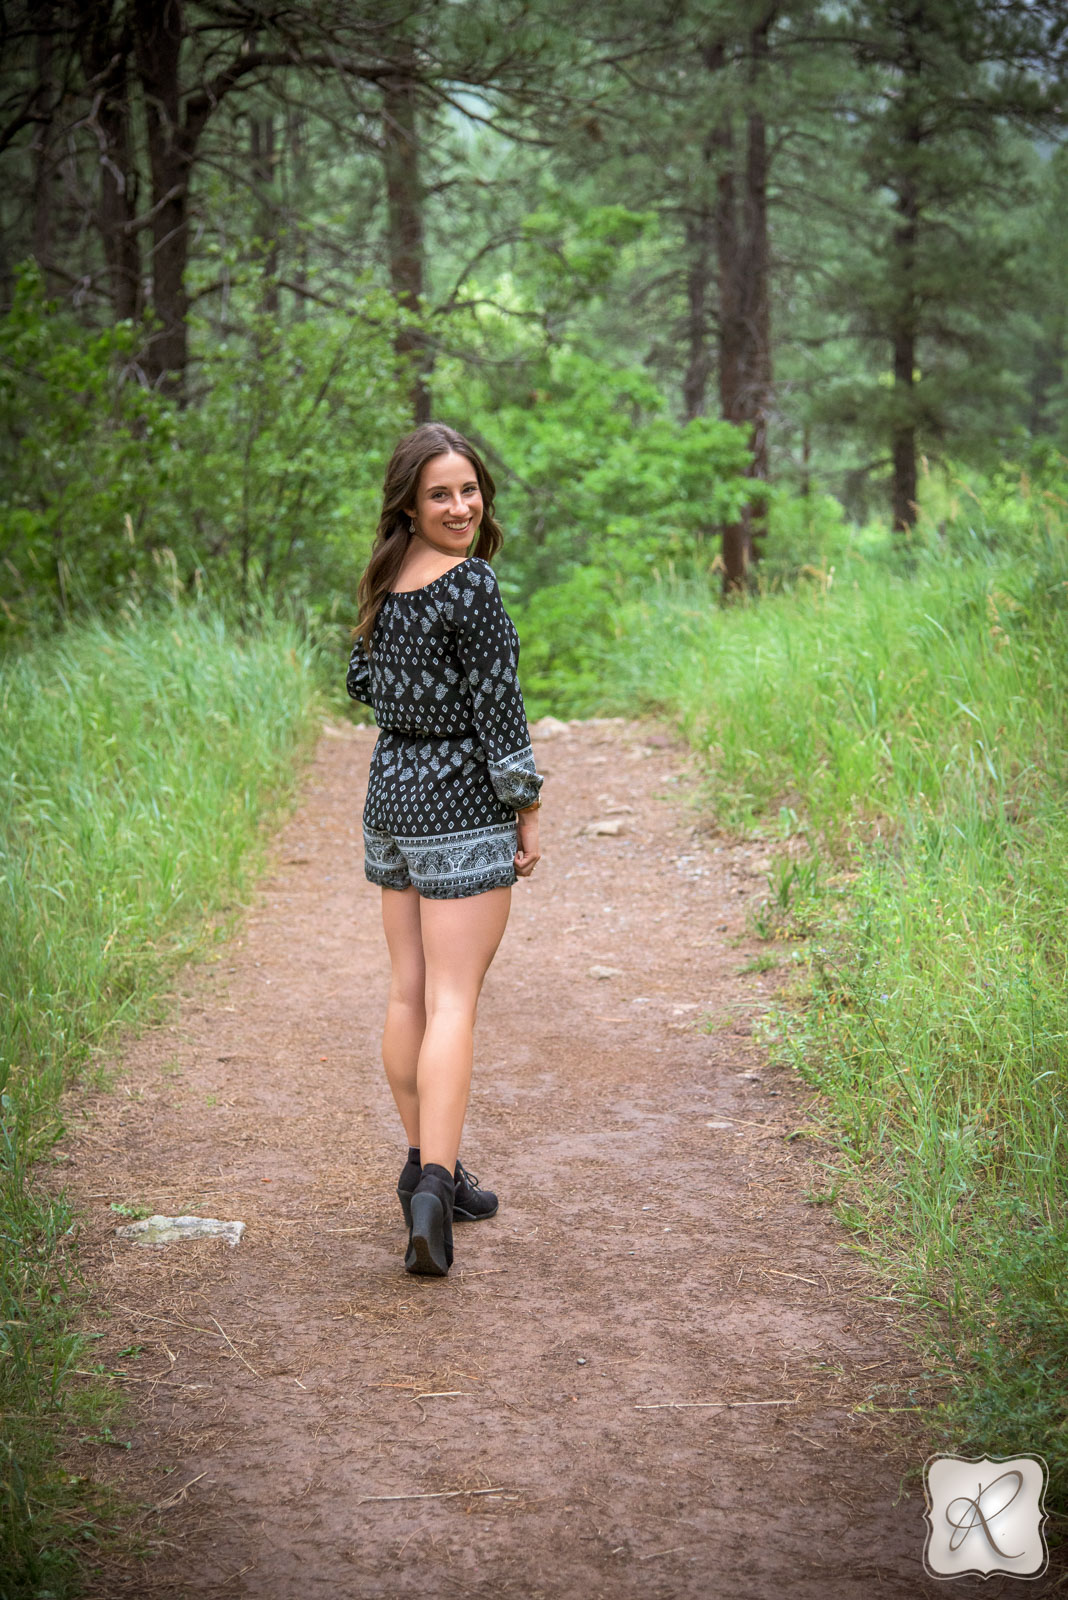 Bella Sage's Senior Pictures - walking in the woods